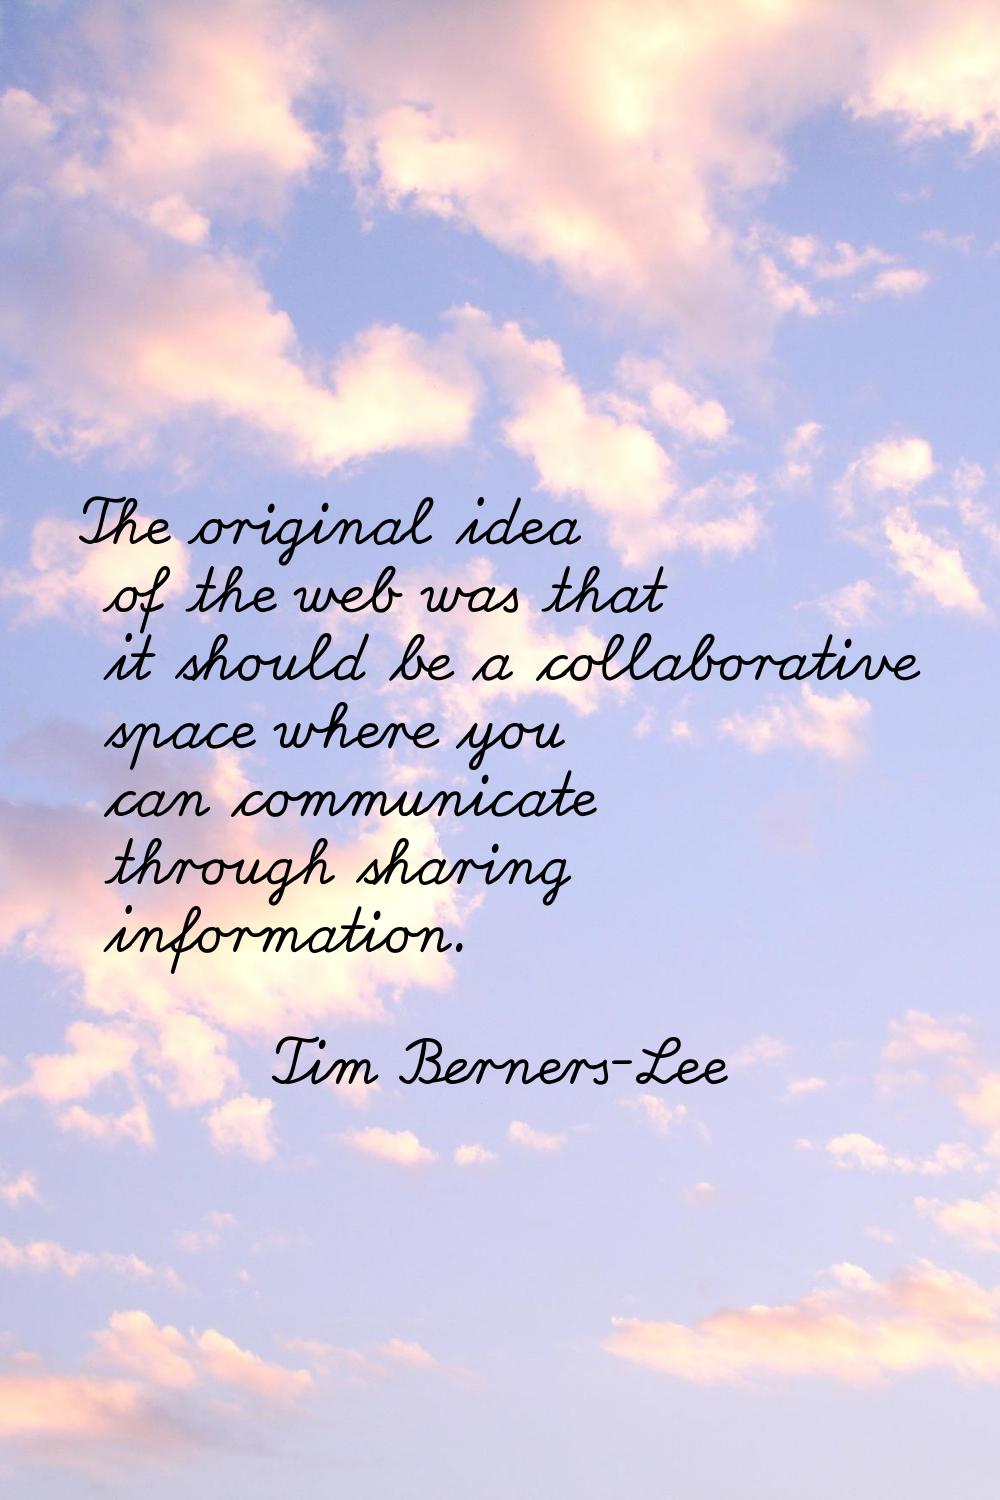 The original idea of the web was that it should be a collaborative space where you can communicate 